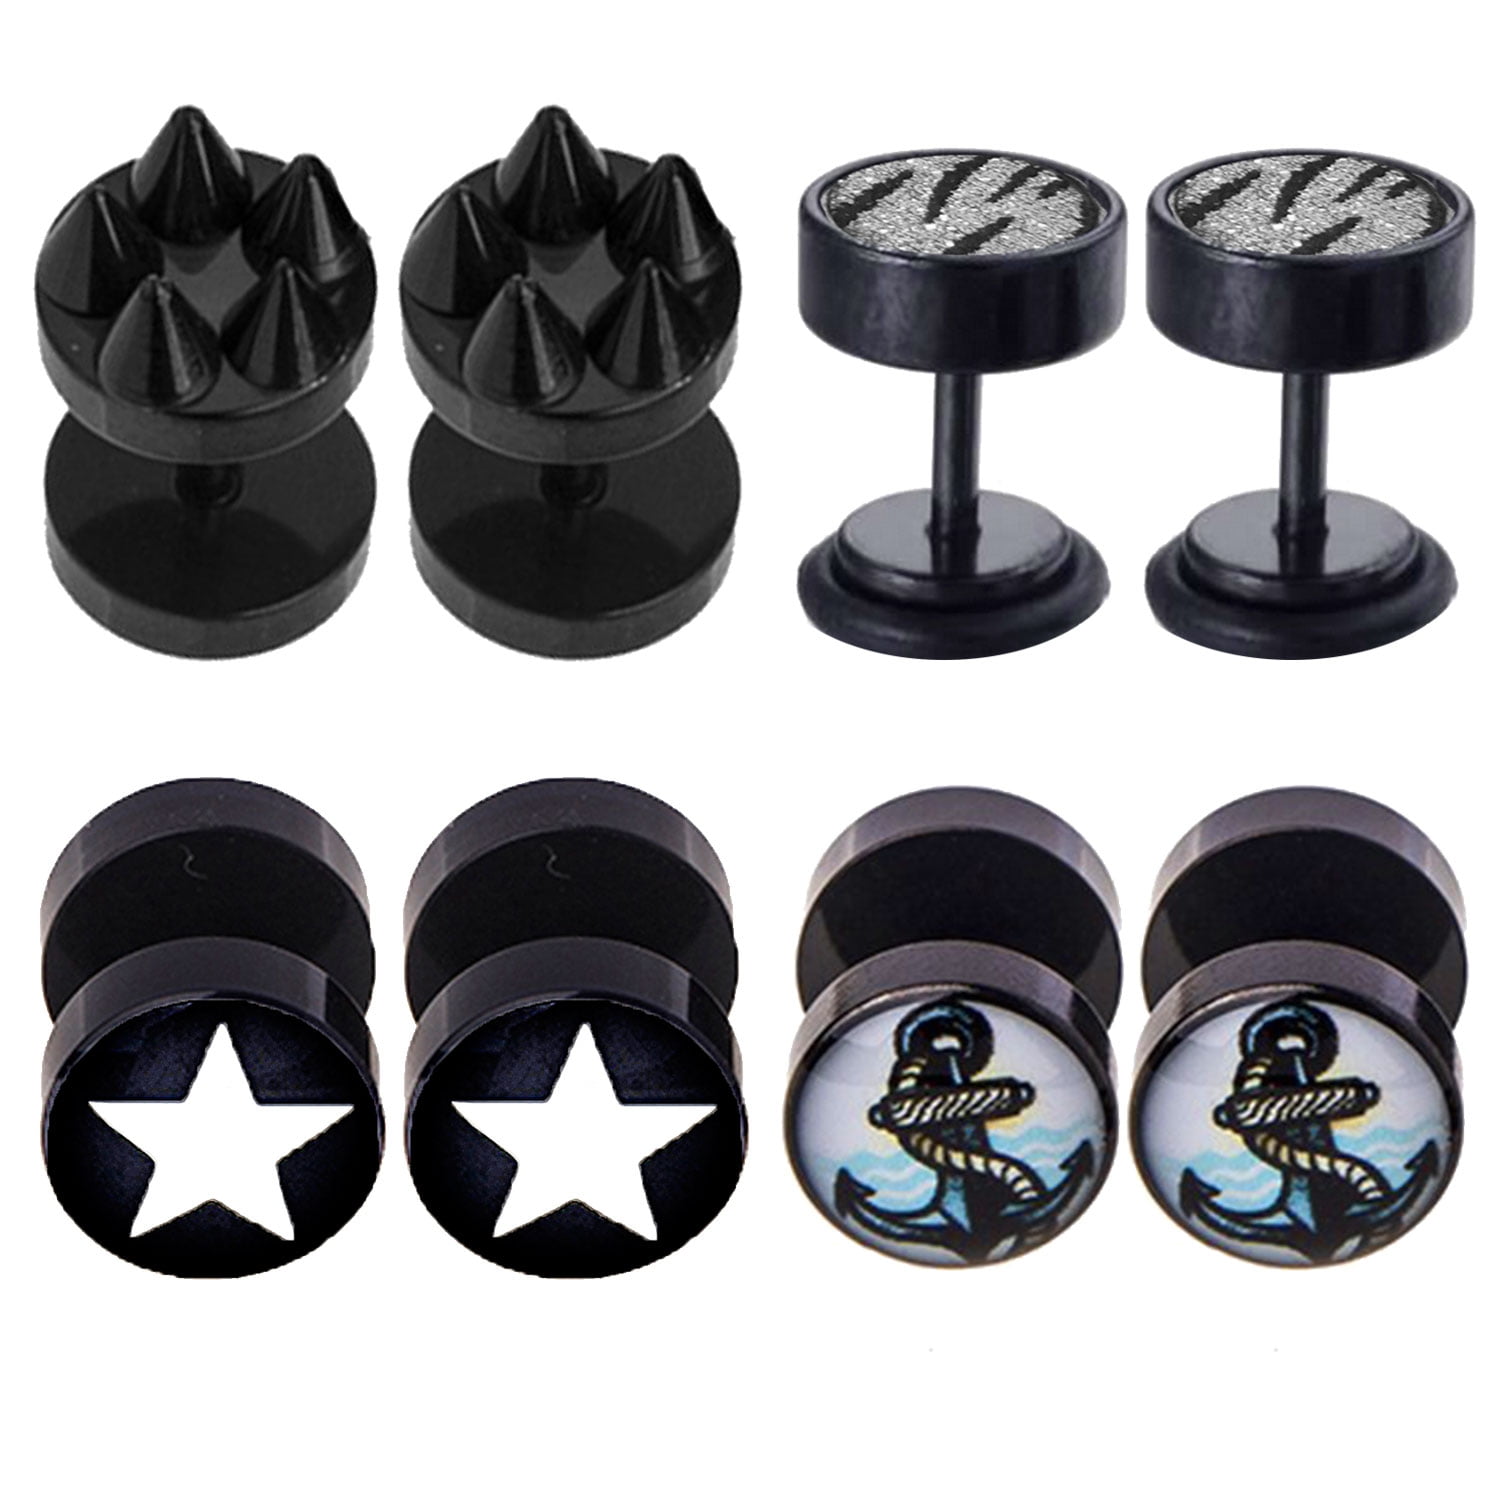 Fake Metal Cheaters Illusion Ear Plugs 16G Black/Silver Look 0G-00G Small 4x 